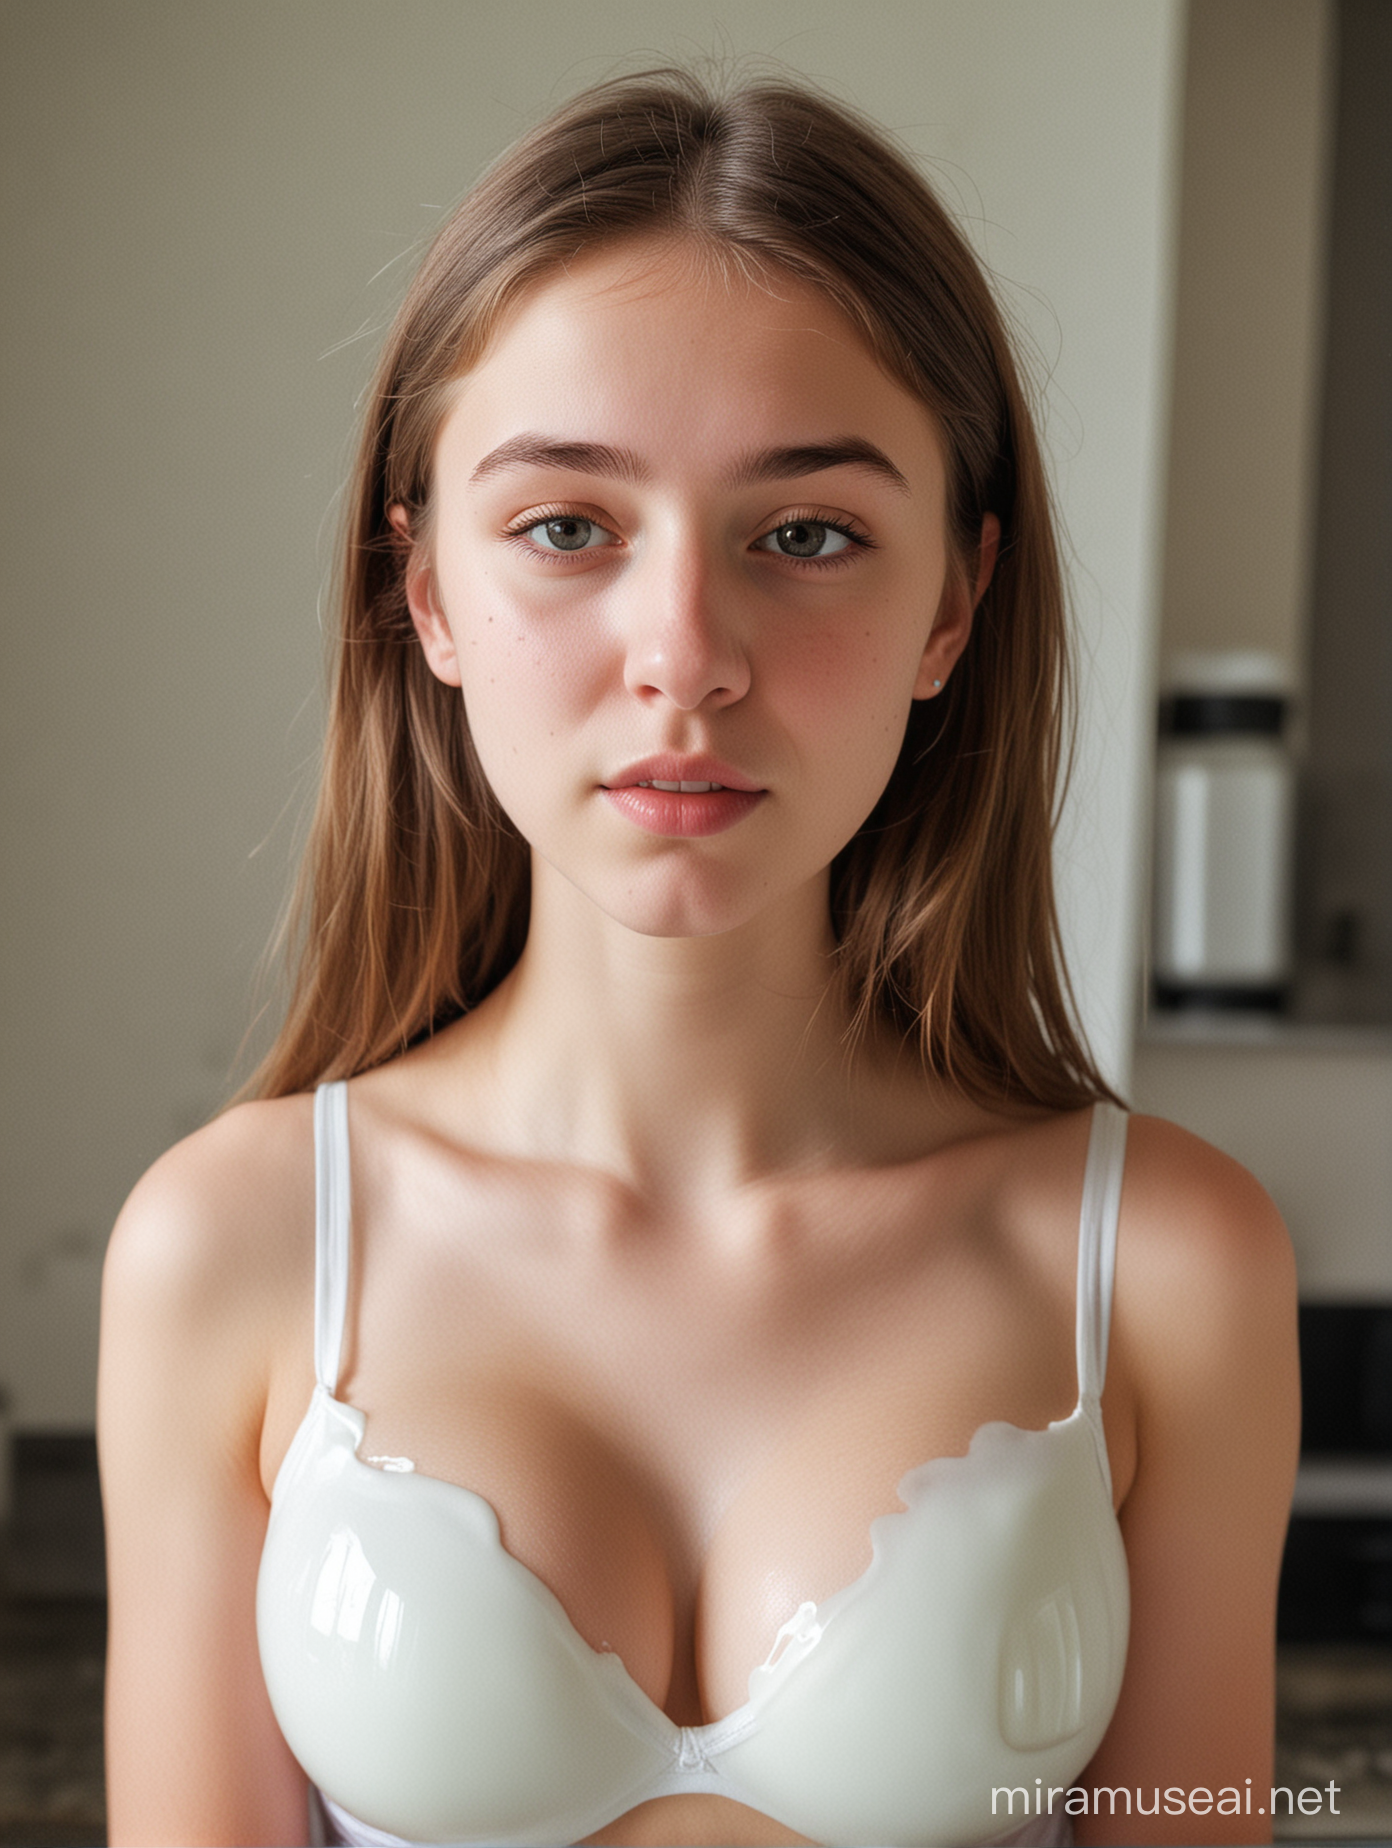 Teen girl with spilled milk on her cleavage